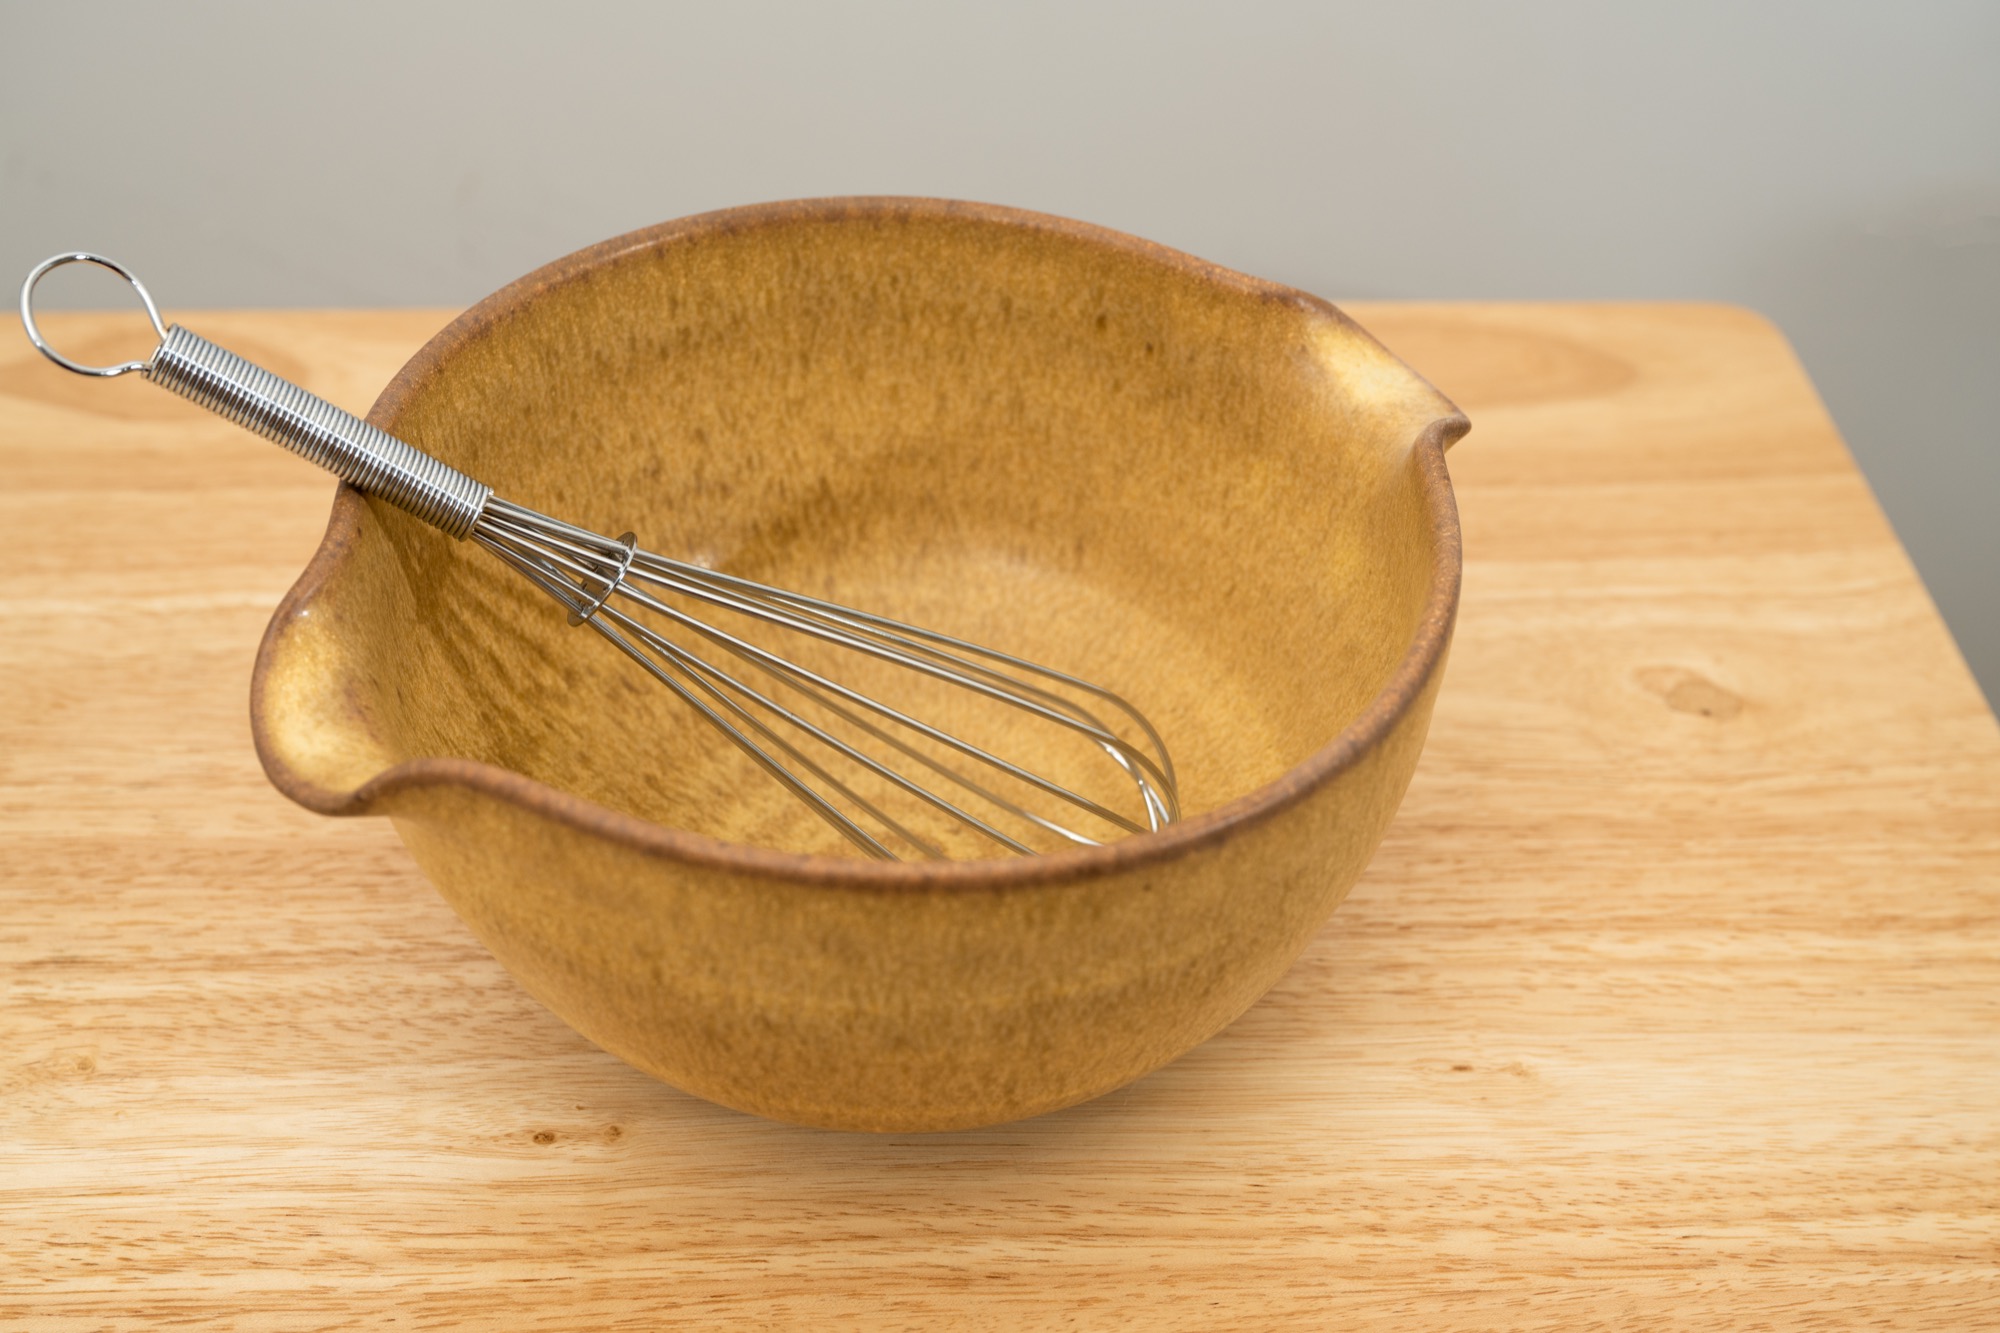 Clay Coyote Mixing Bowl with tiny wire whisk for whipping batter or eggs